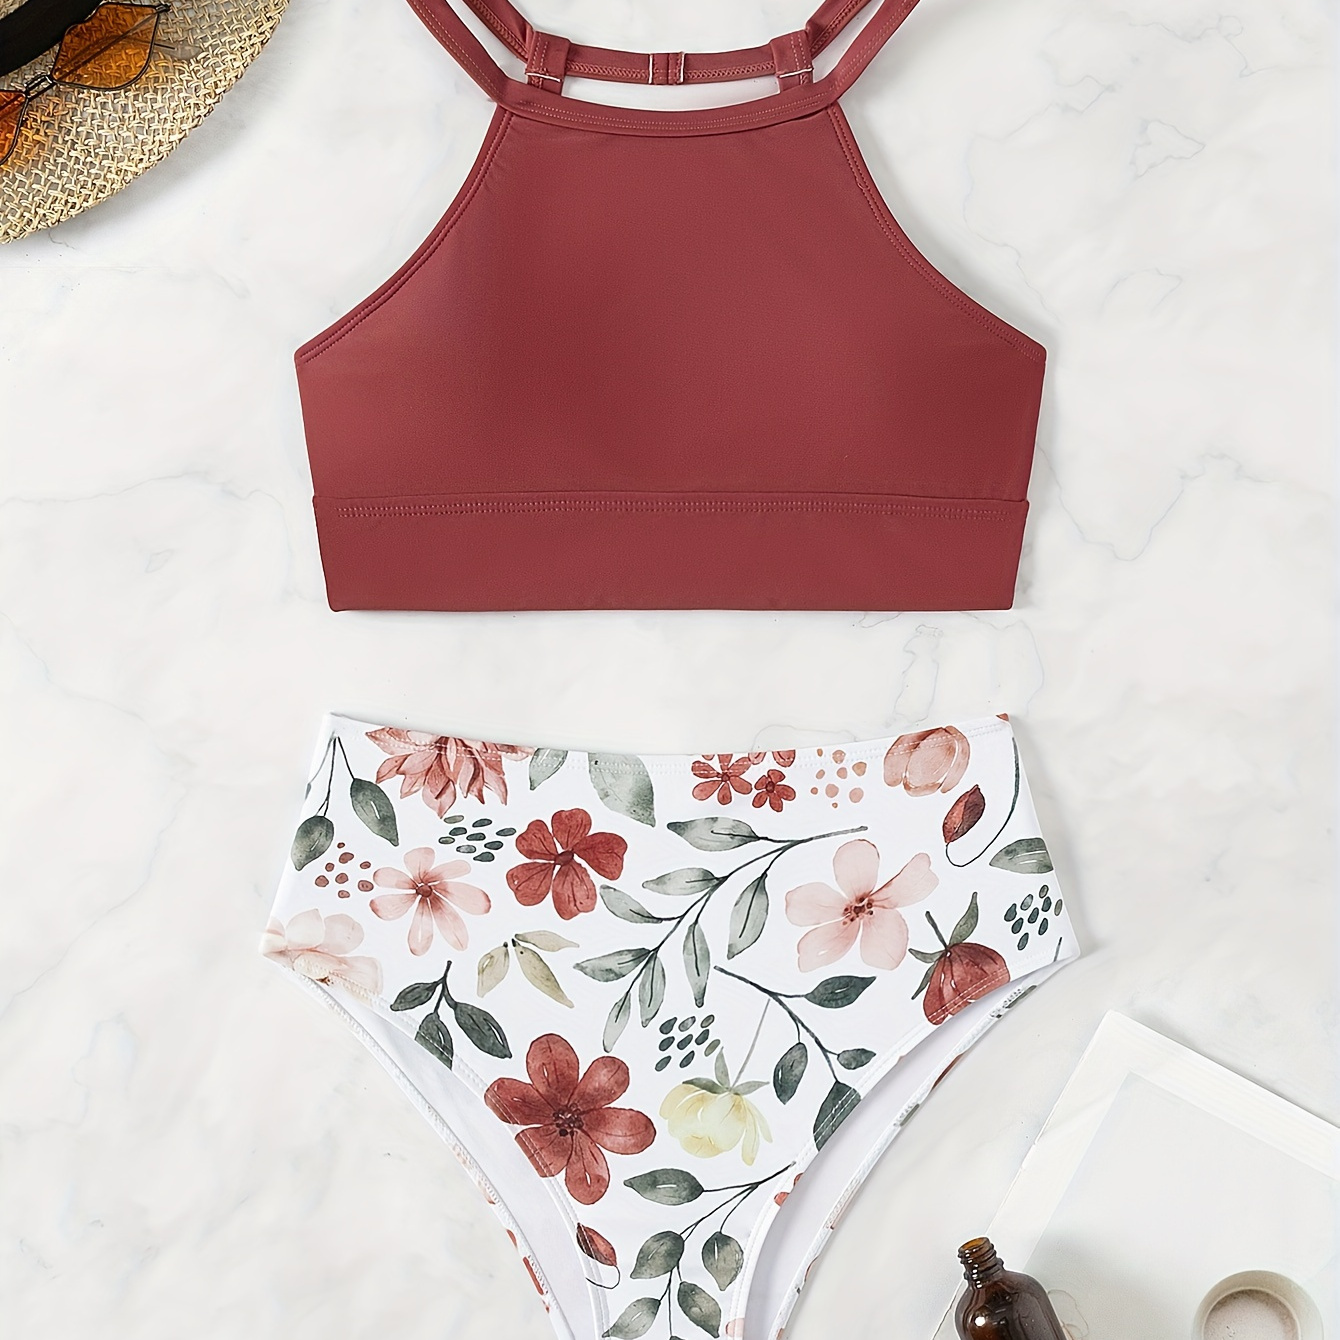 

Leaf&floral Print High Waisted 2 Piece Set Bikini, Spaghetti Strap Stretchy Top & Comfy Bottoms Swimsuits, Women's Swimwear & Clothing